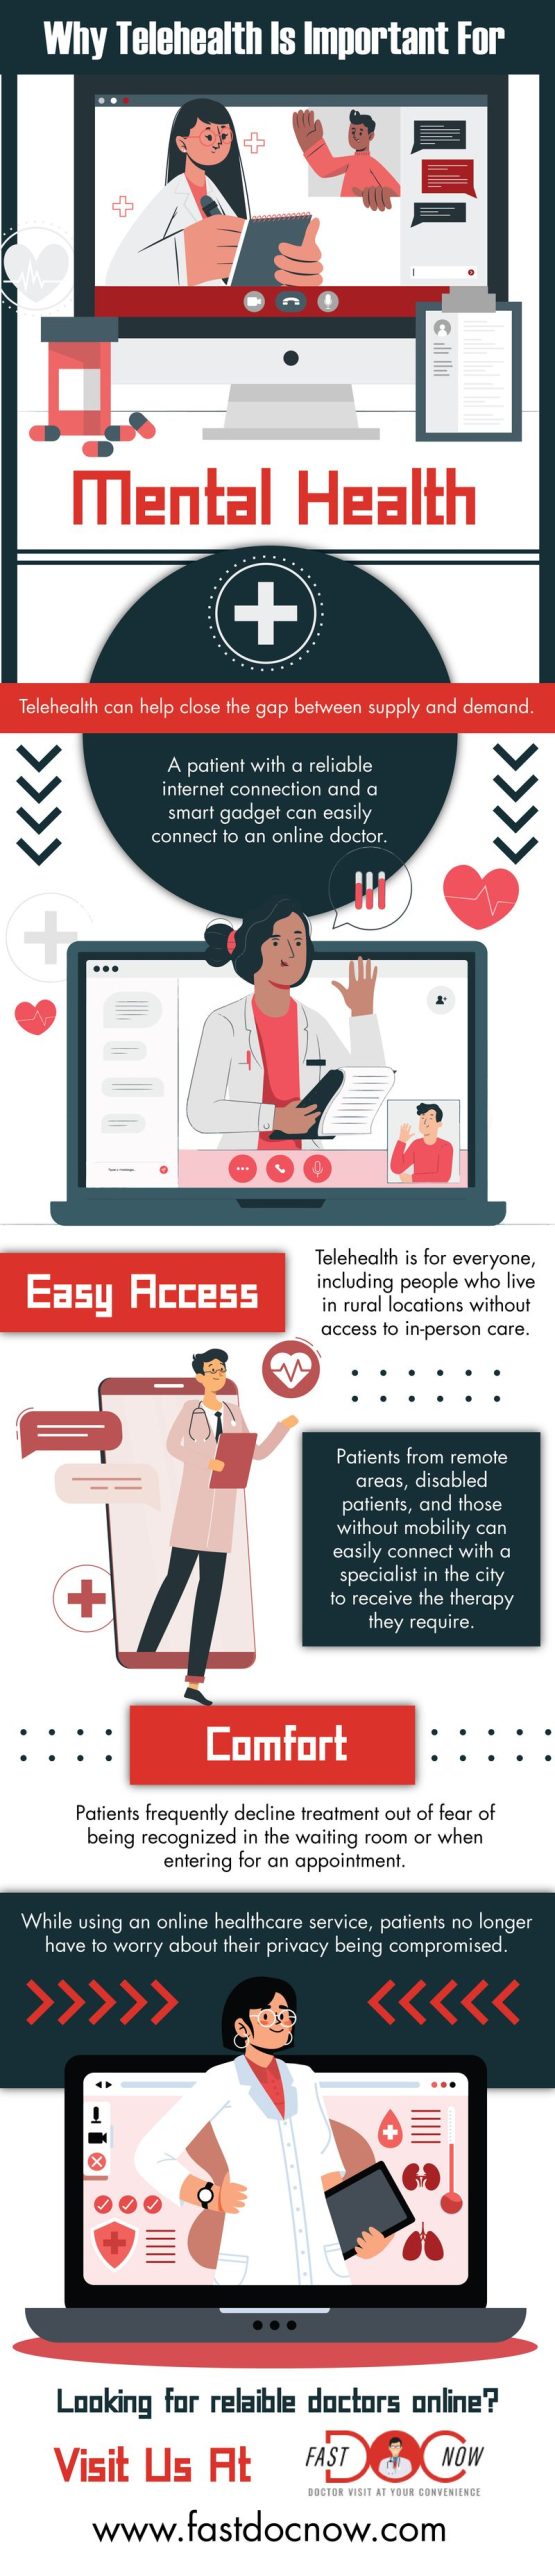 Why Telehealth Is Important For Mental Health